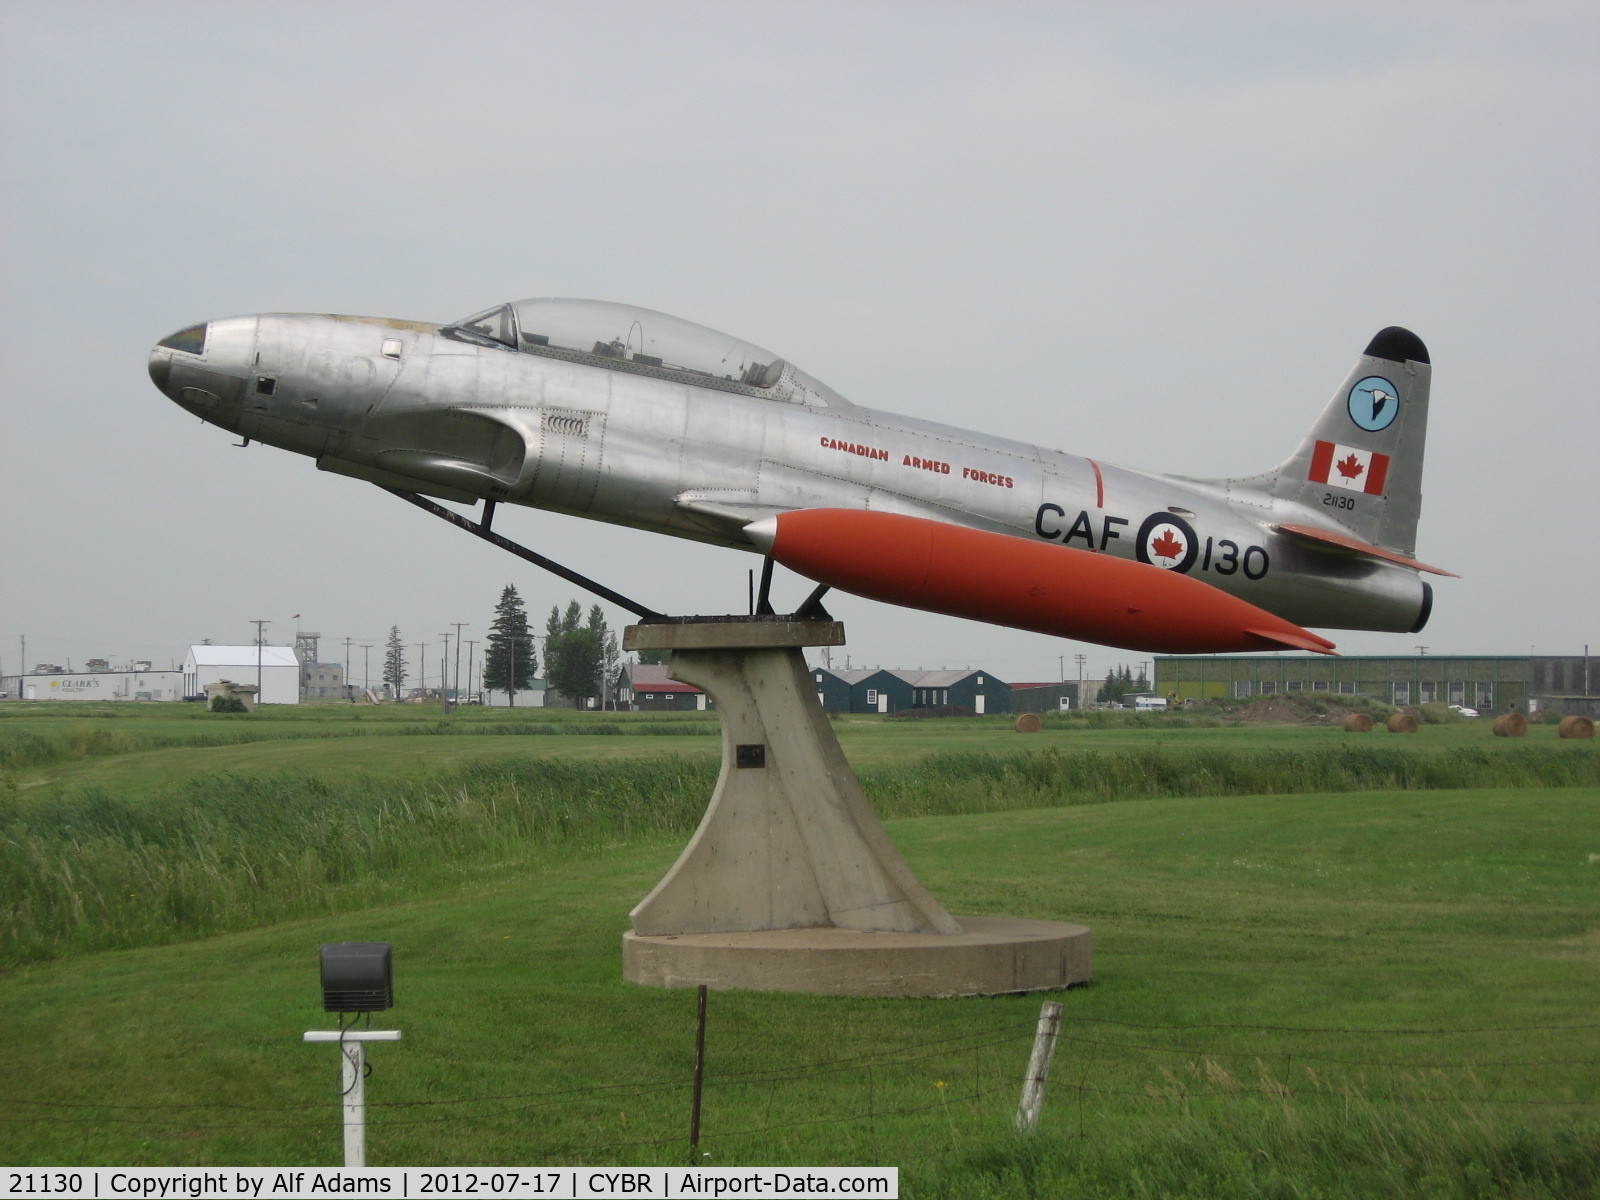 21130, Canadair CT-133 Silver Star C/N T33-130, Displayed on a pedestal near the Municipal Airport in Brandon, Manitoba, Canada in 2012.